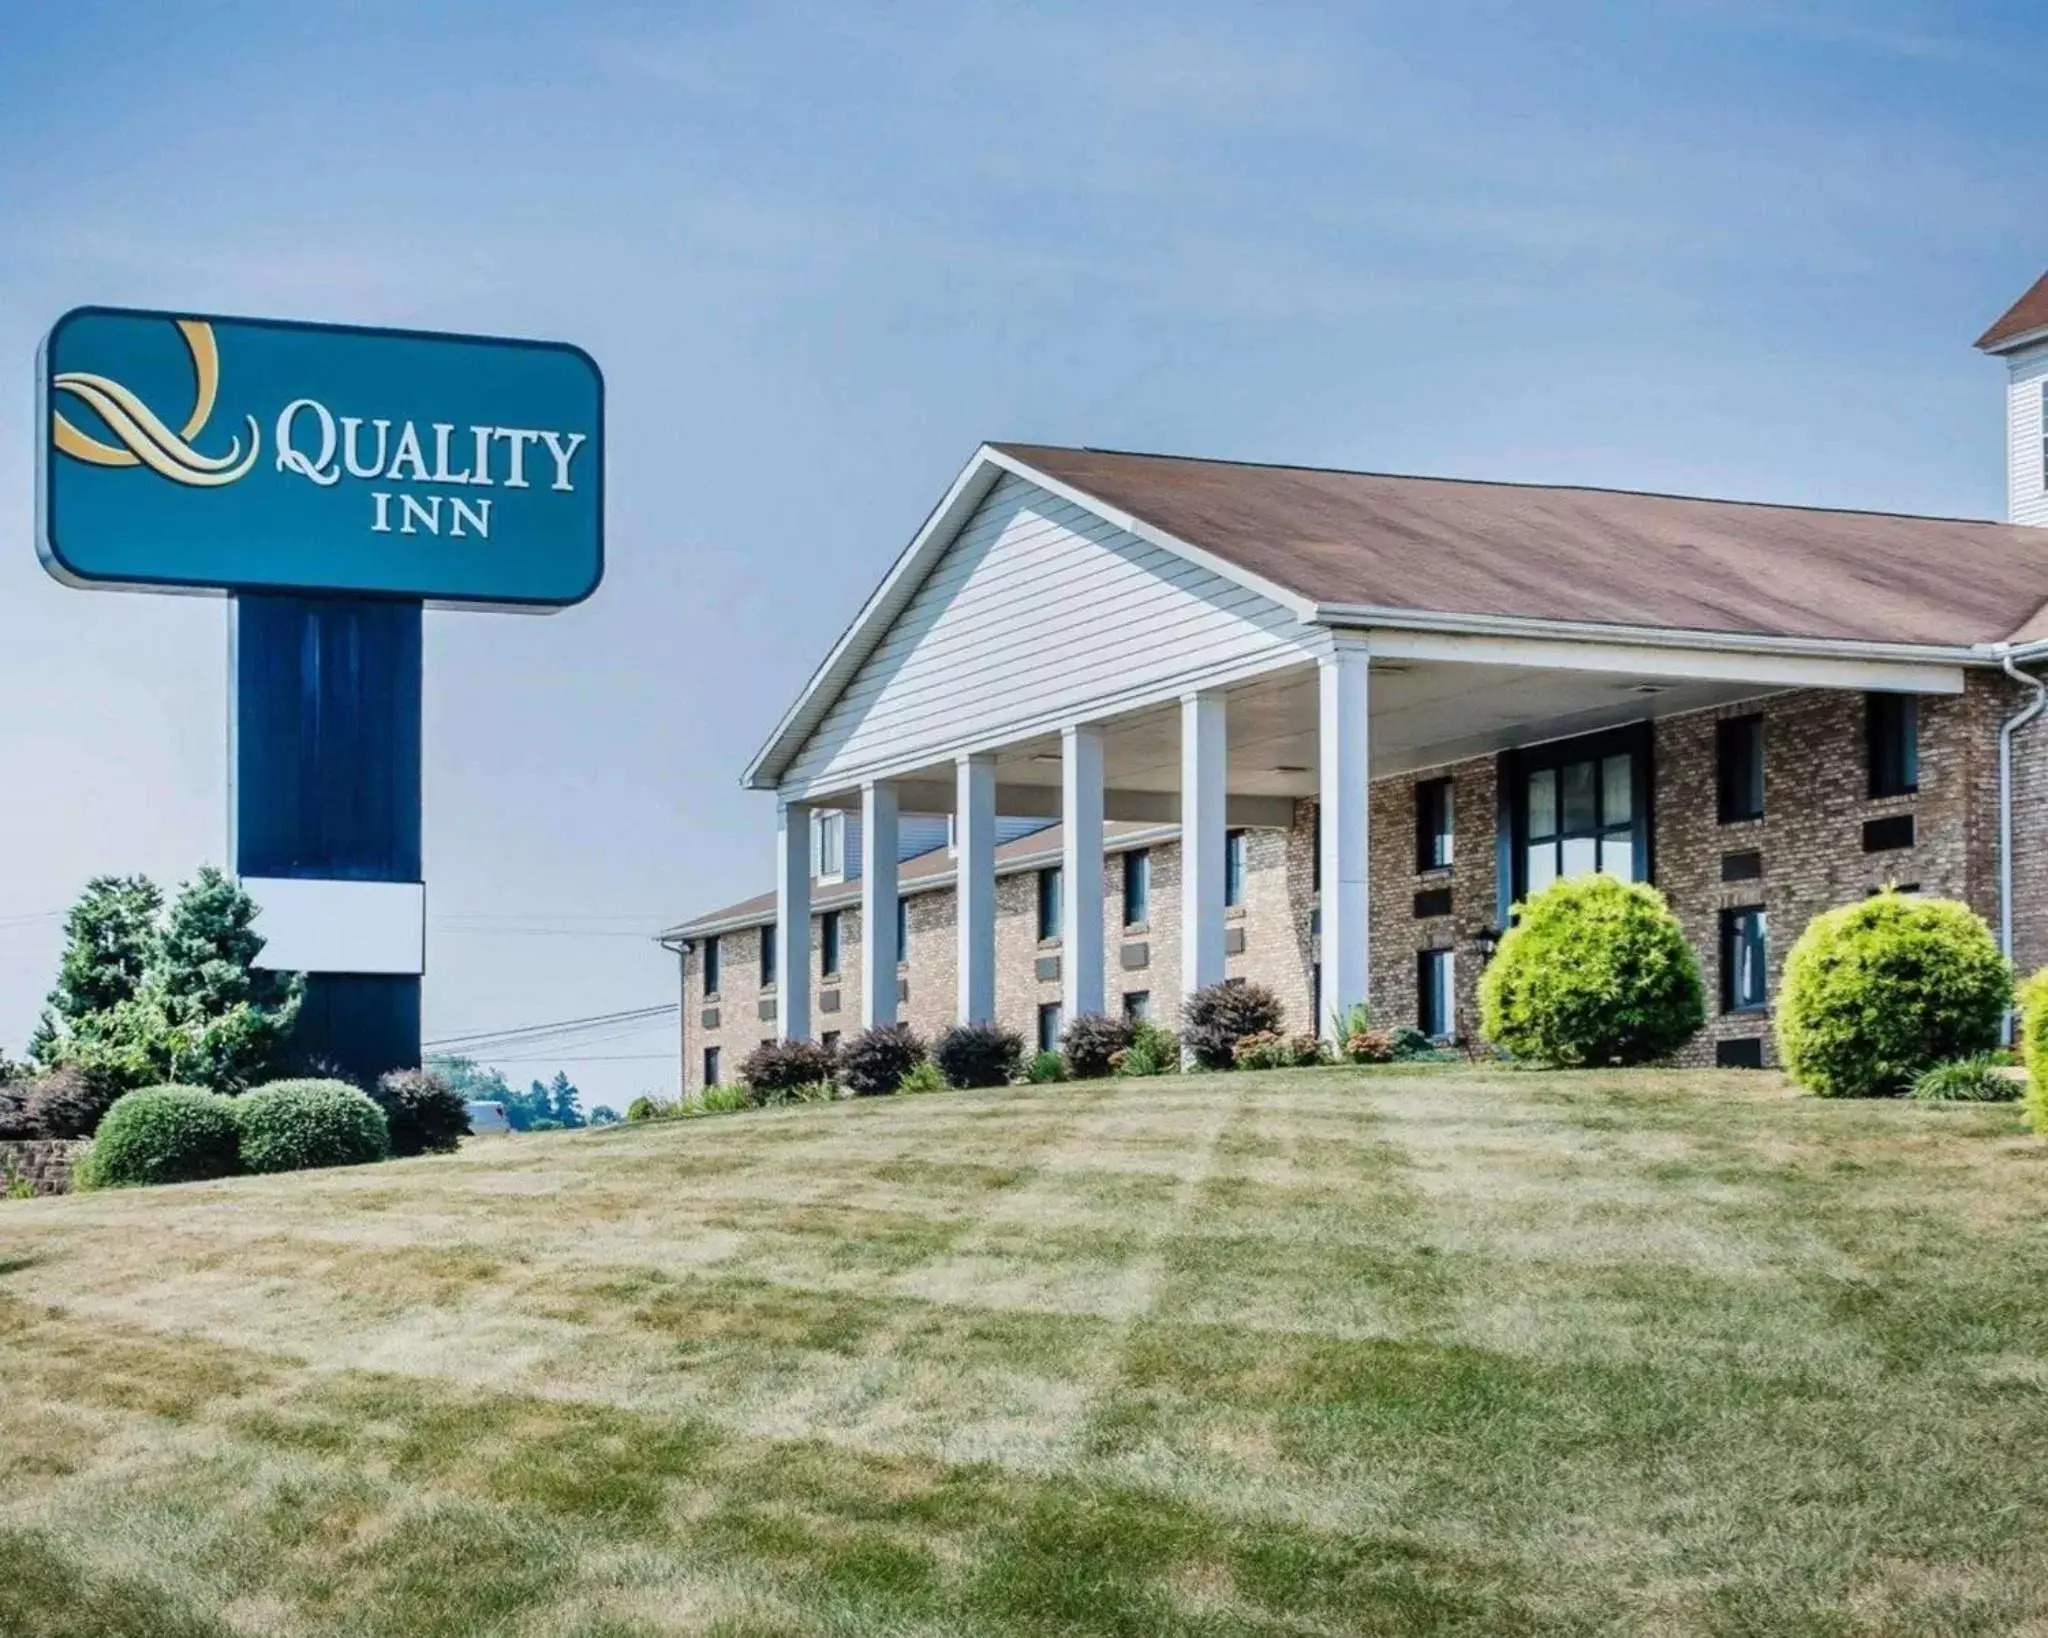 Property building in Quality Inn Riverview Enola-Harrisburg